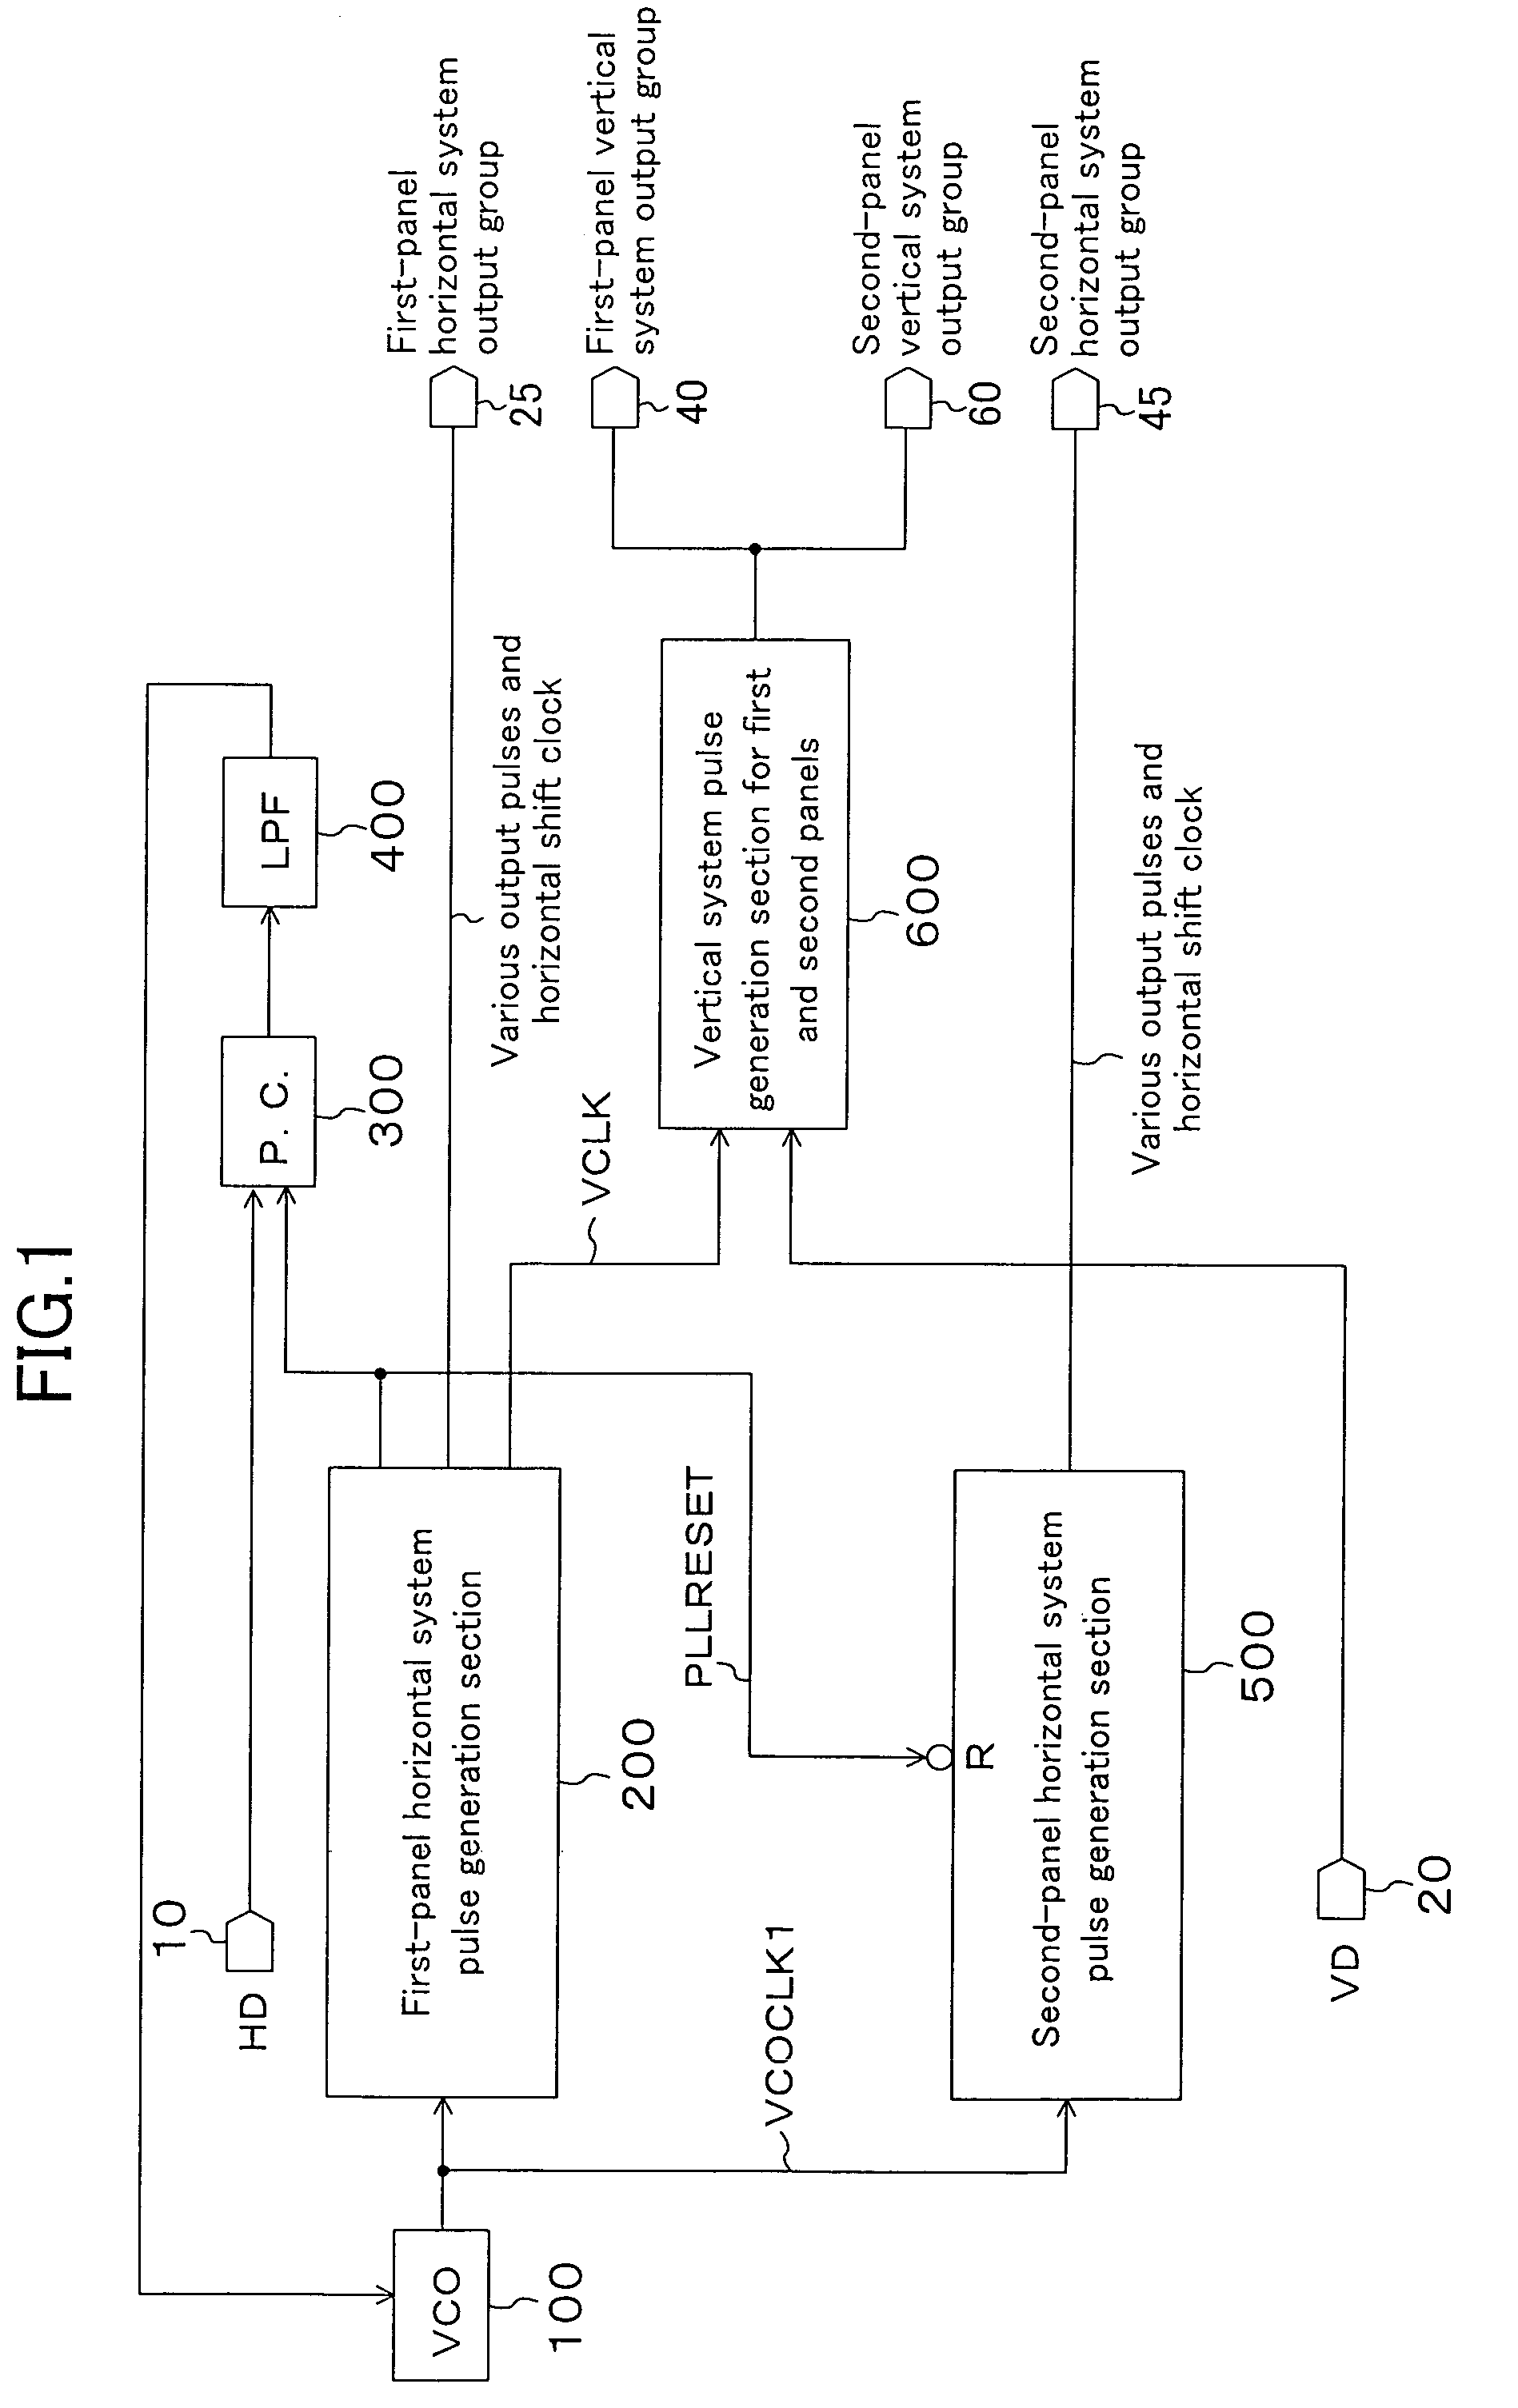 Control circuit for displaying the same video simultaneously to two or more panels